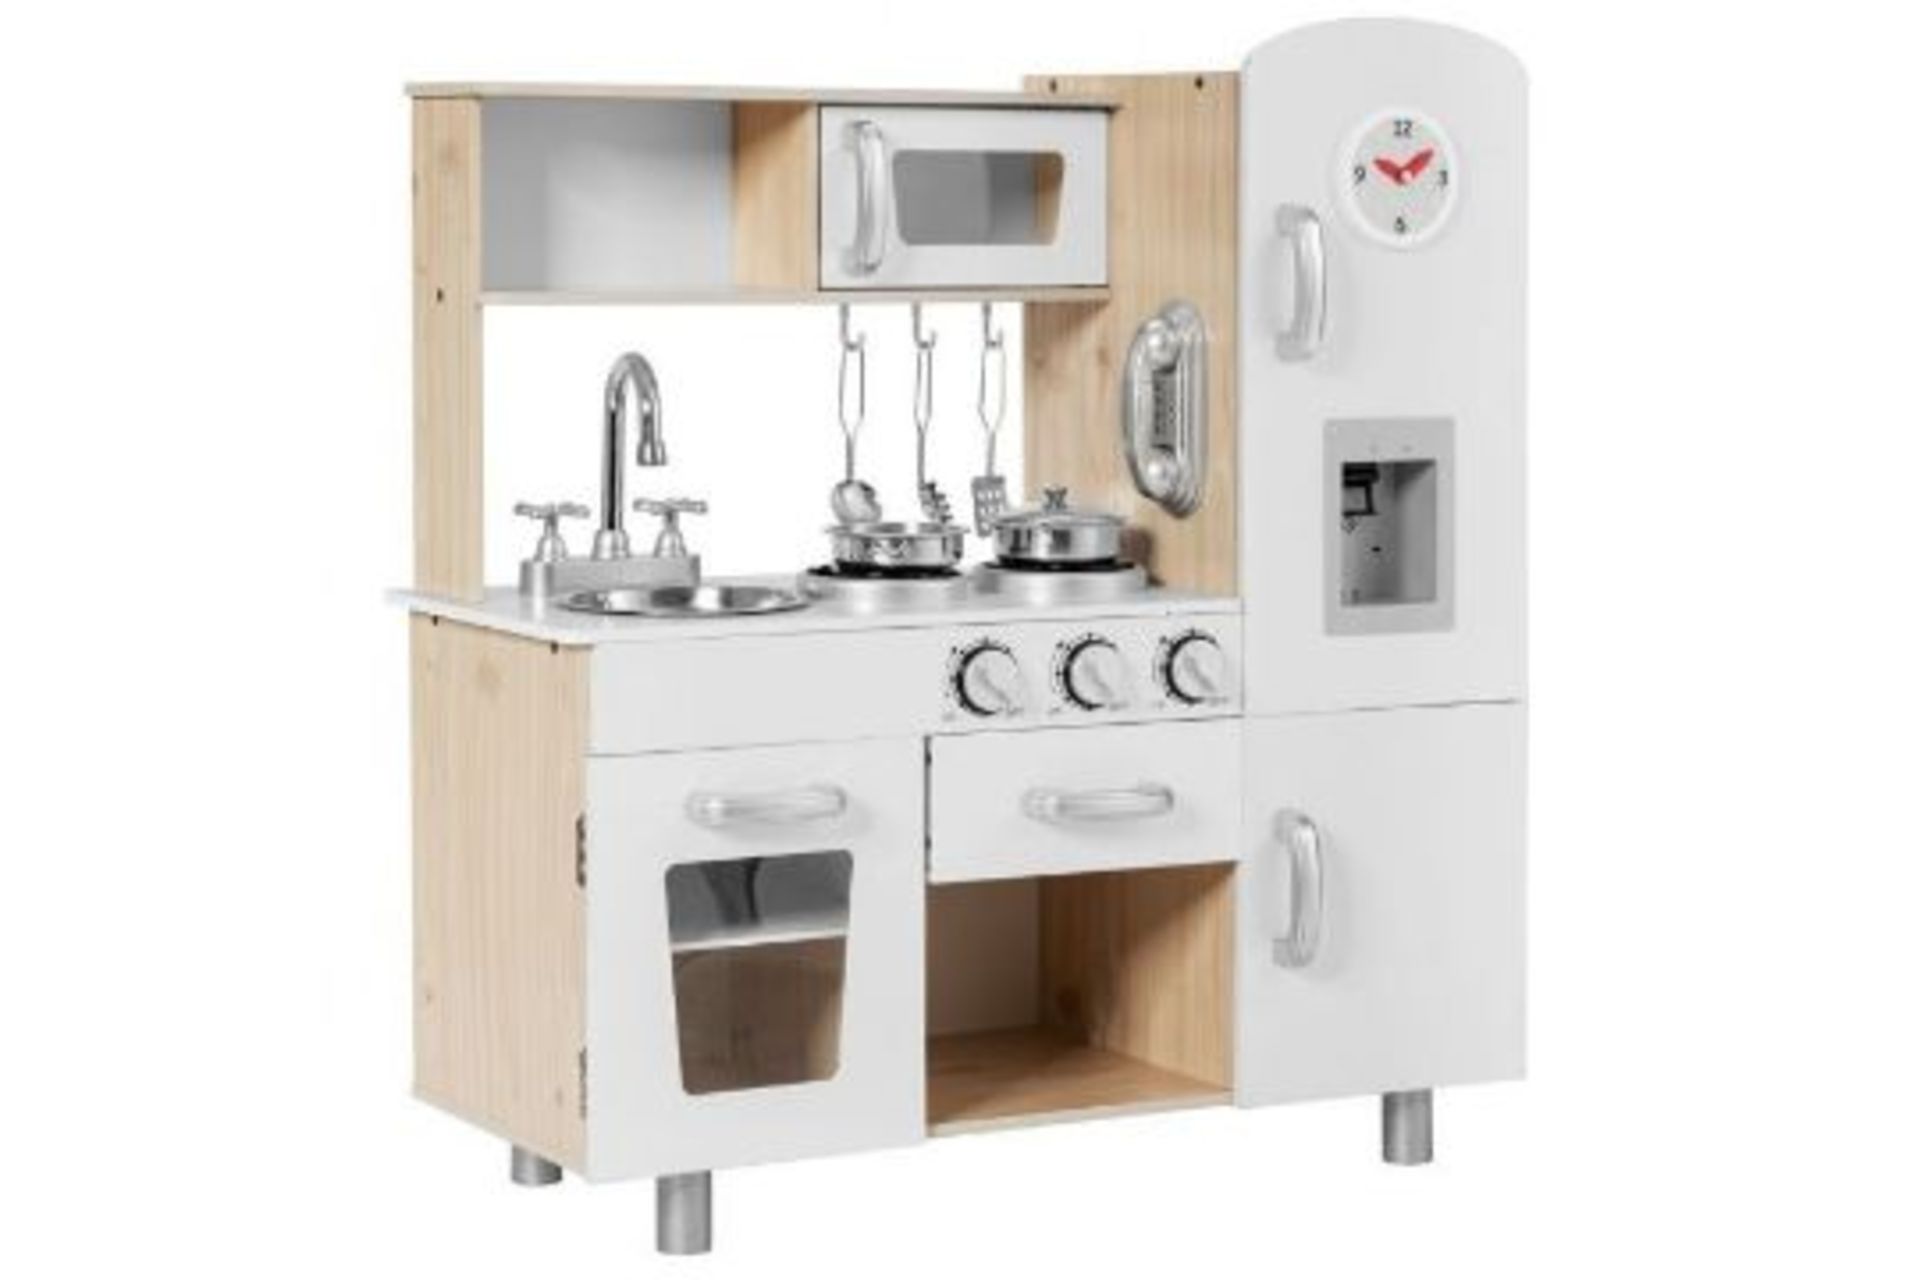 Large Wooden Kids Play Kitchen Pretend Set Toy Cooking Gift. -R14.6. The kids kitchen play set is